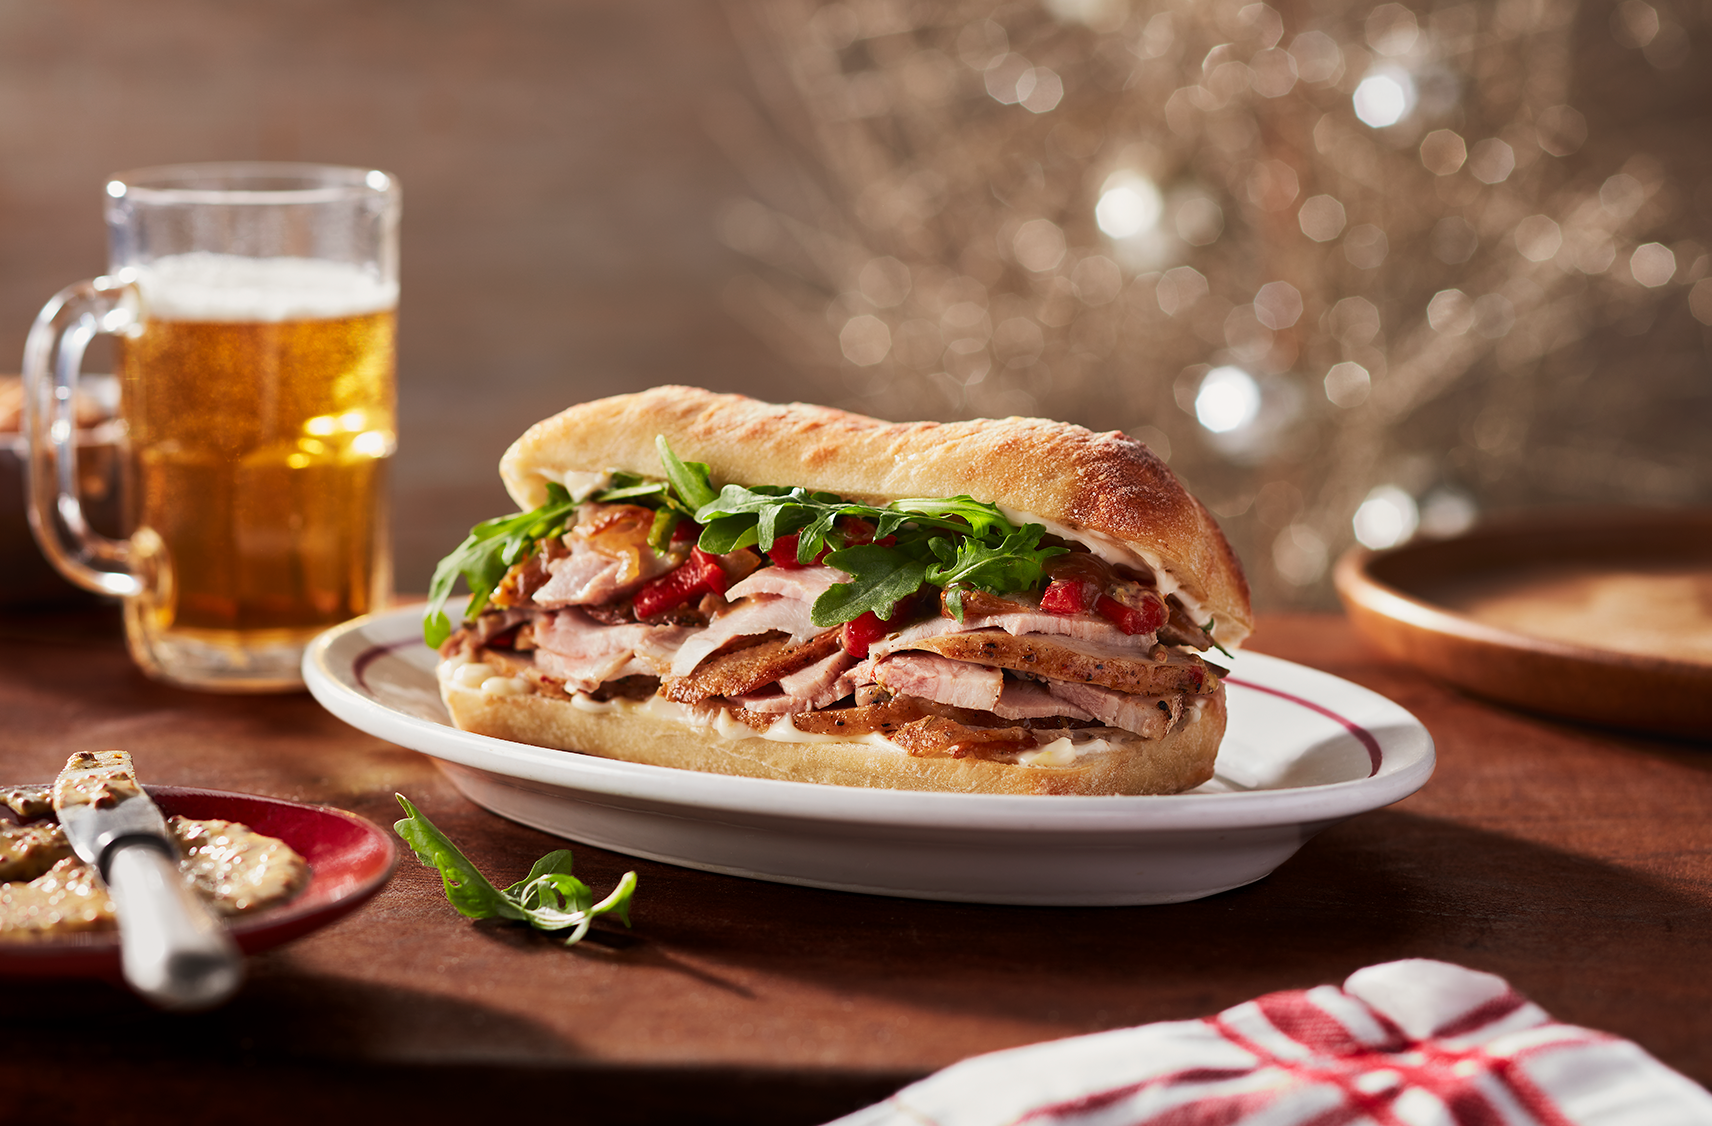 A delicious toasted sandwich filled with slices of porchetta, roasted red peppers and arugula.